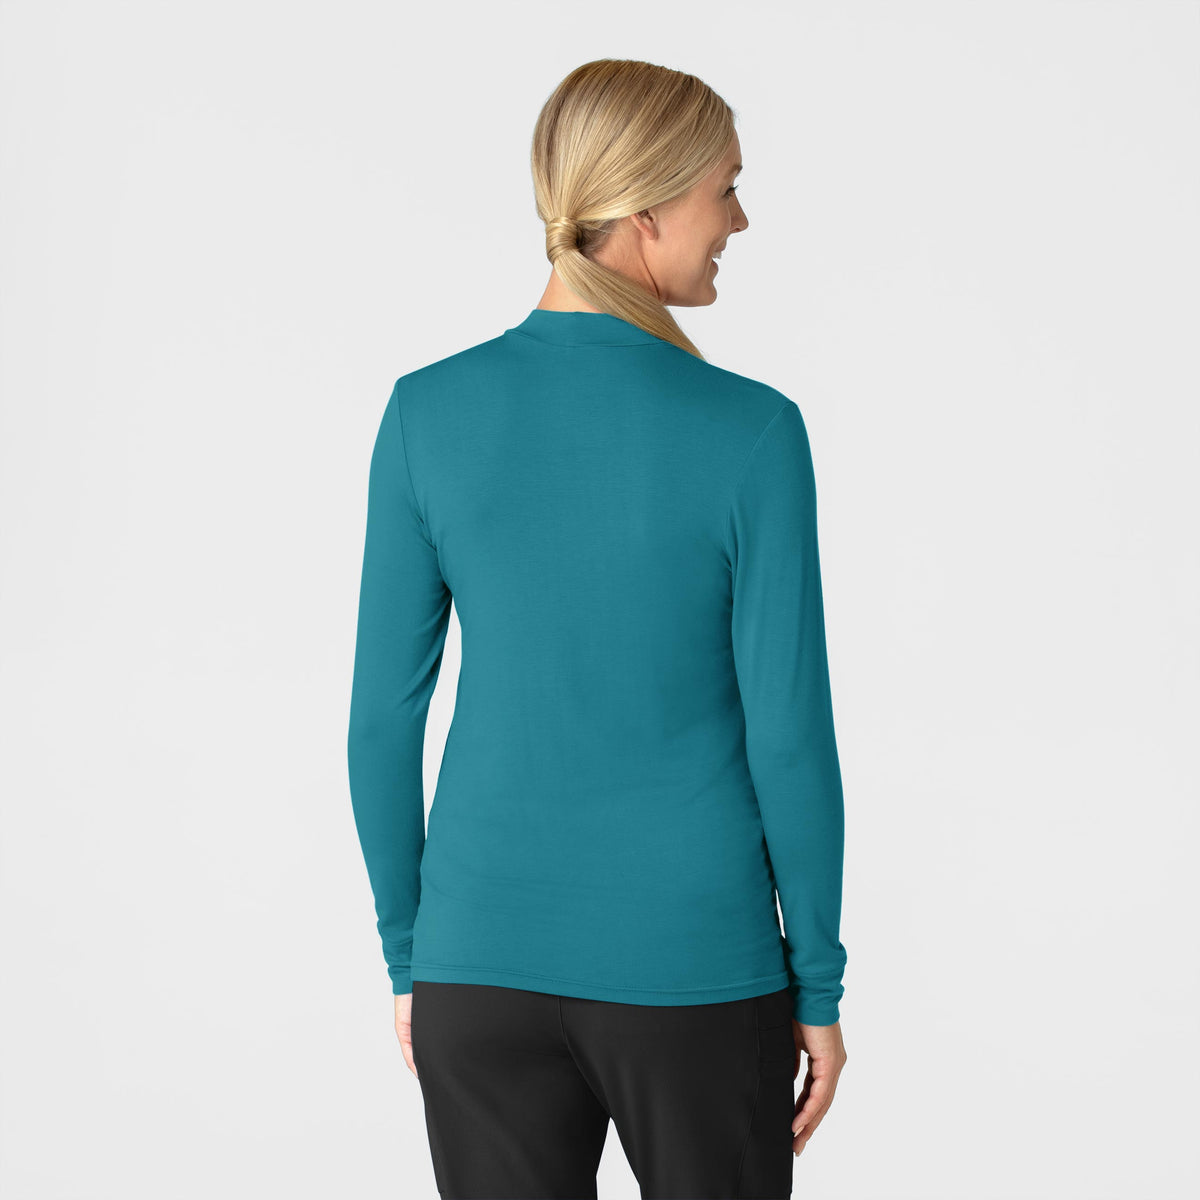 Knits and Layers Women’s Long Sleeve Mock Neck Silky Tee Bay Blue back view